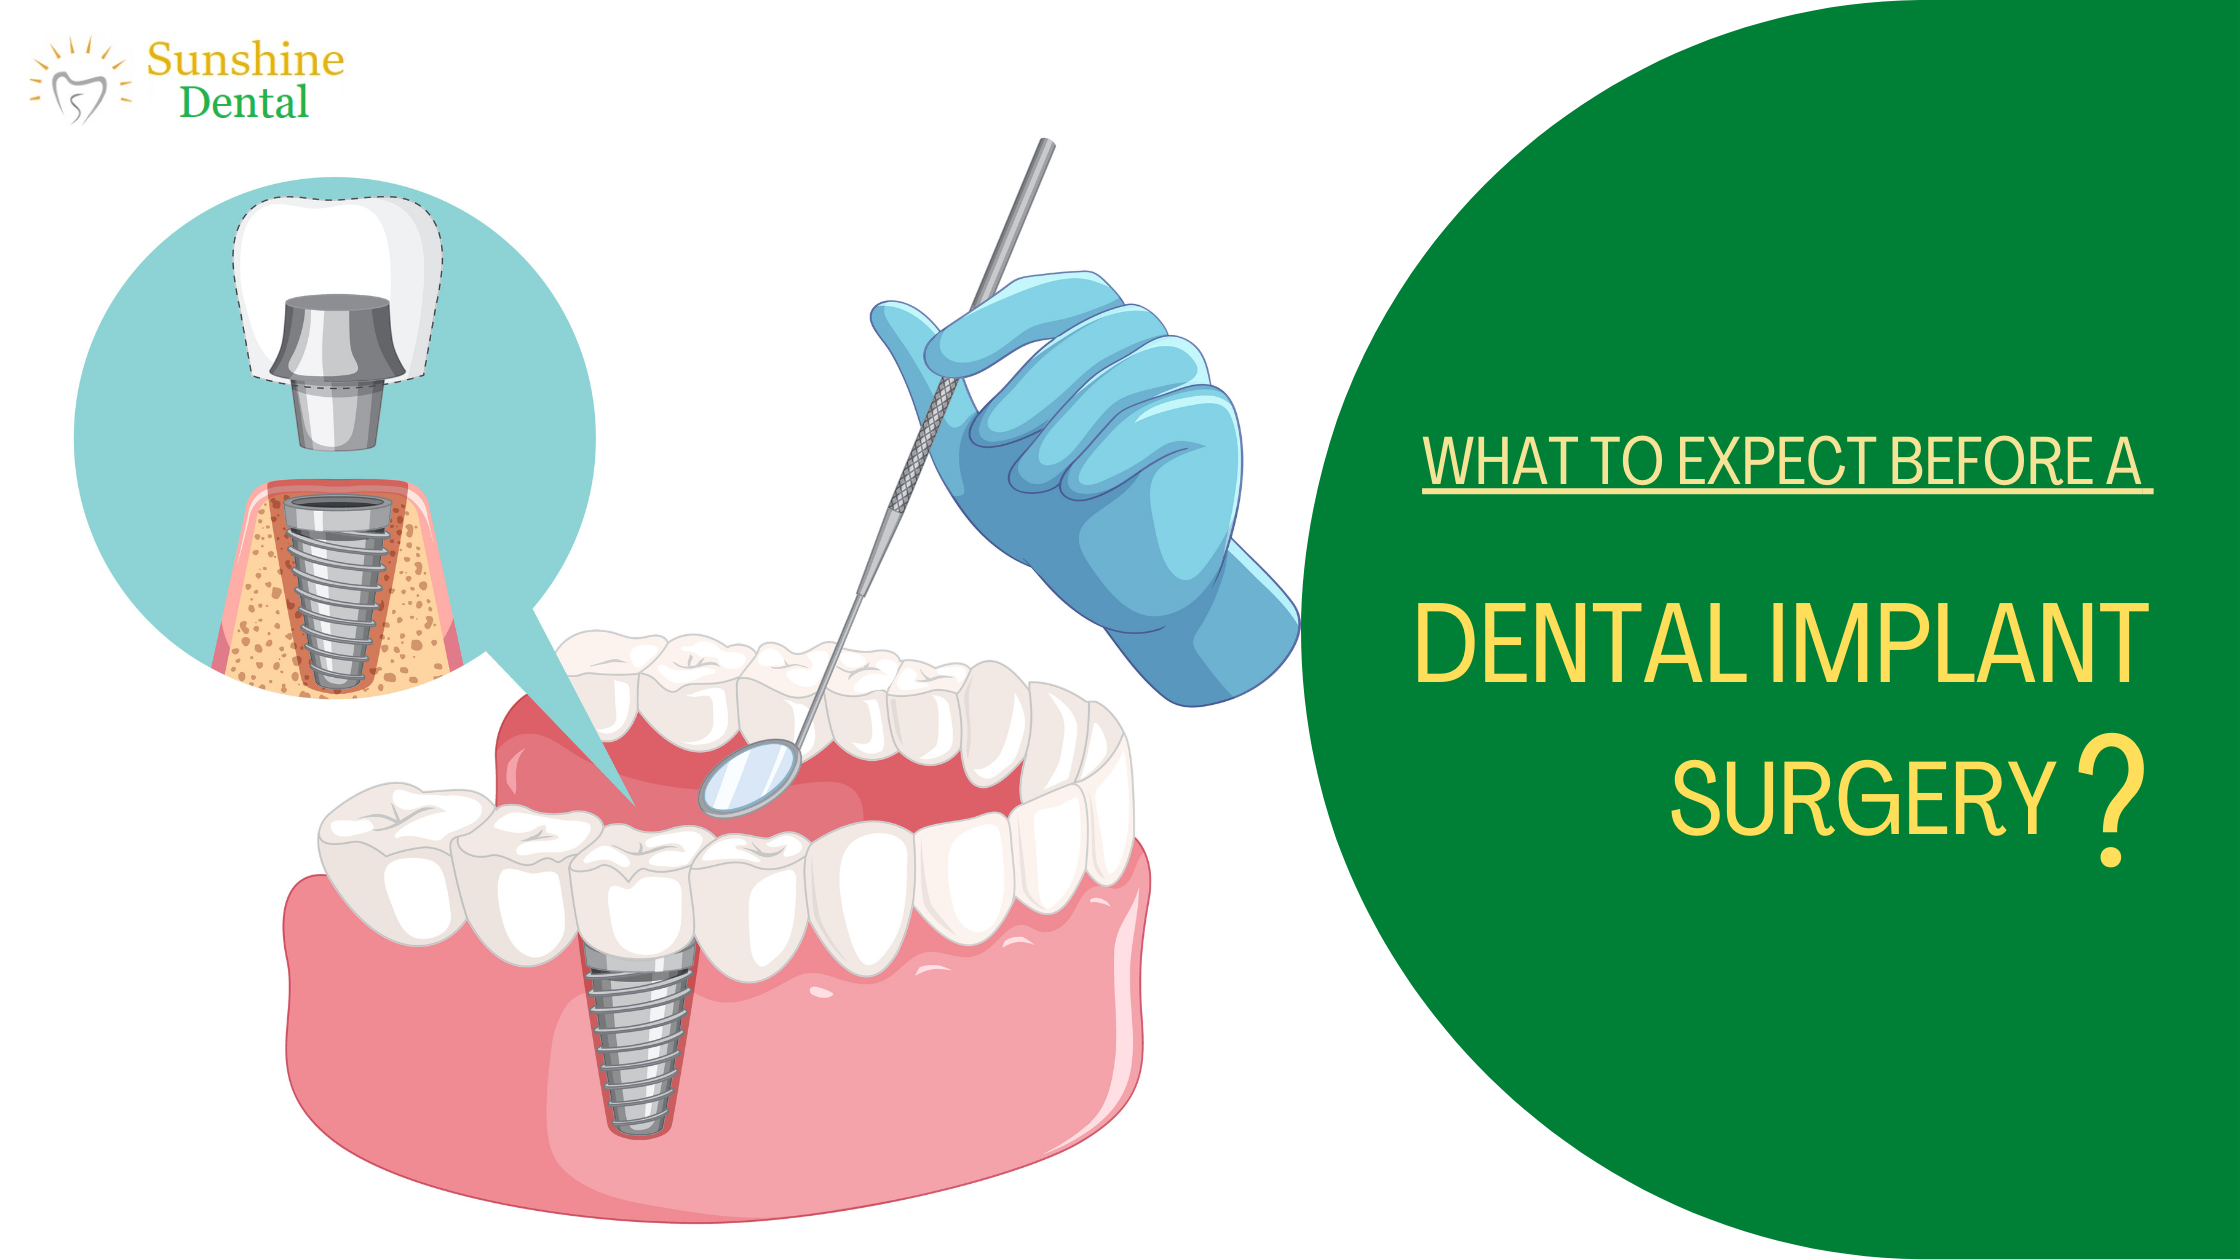 What to Expect Before a Dental Implant Surgery Best Dental Implants in Bangalore